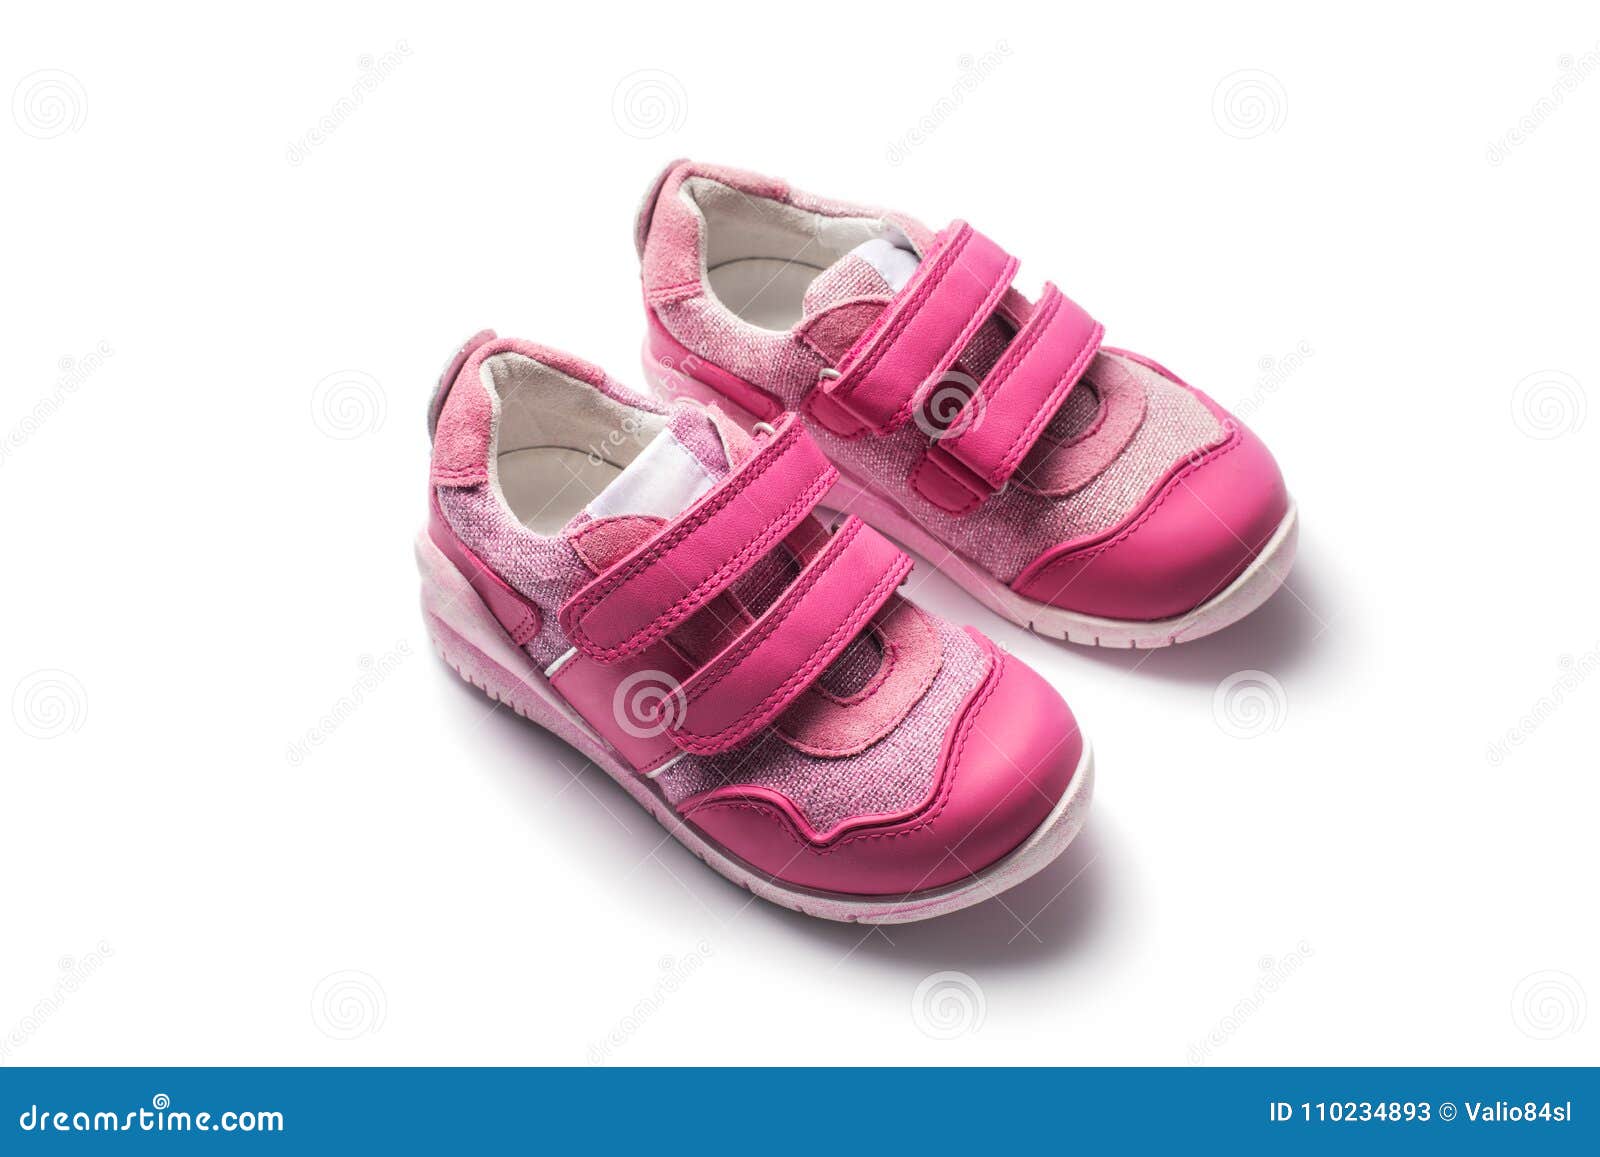 Baby Girl Small Pink Sport Shoes Isolated on White Stock Image - Image ...